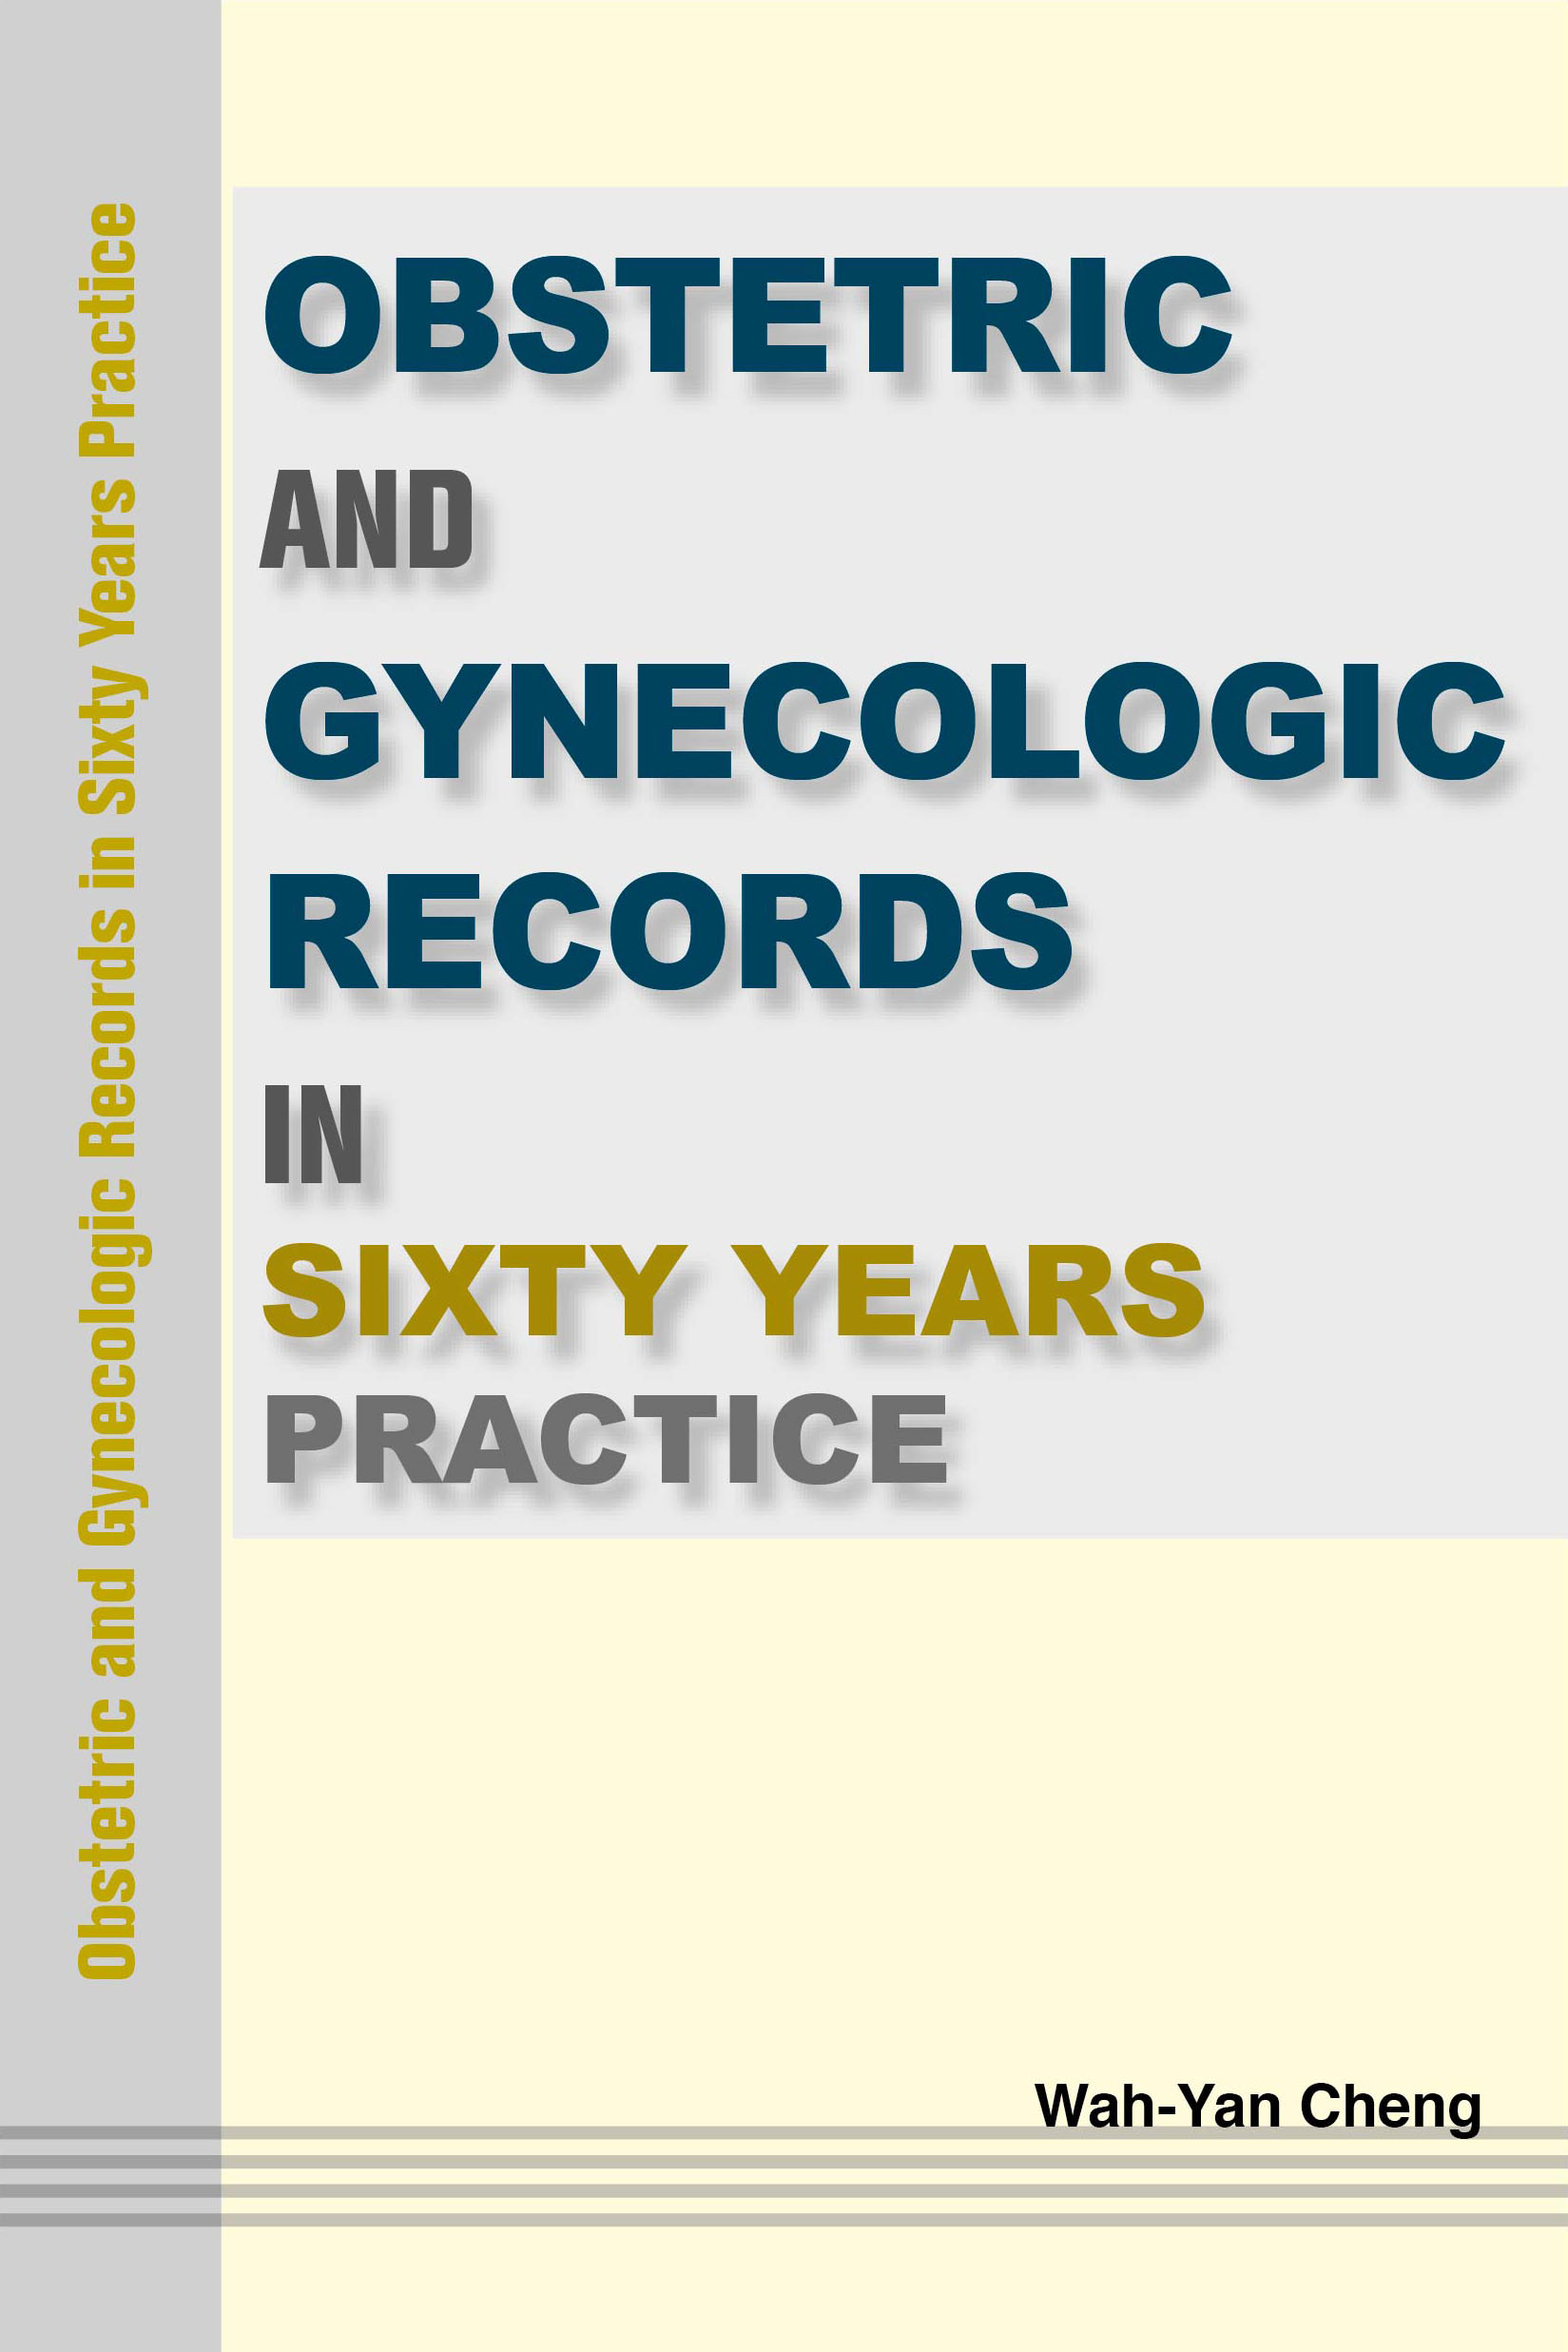 Obsteric and Gynecologic Records in Sixty Years Practice